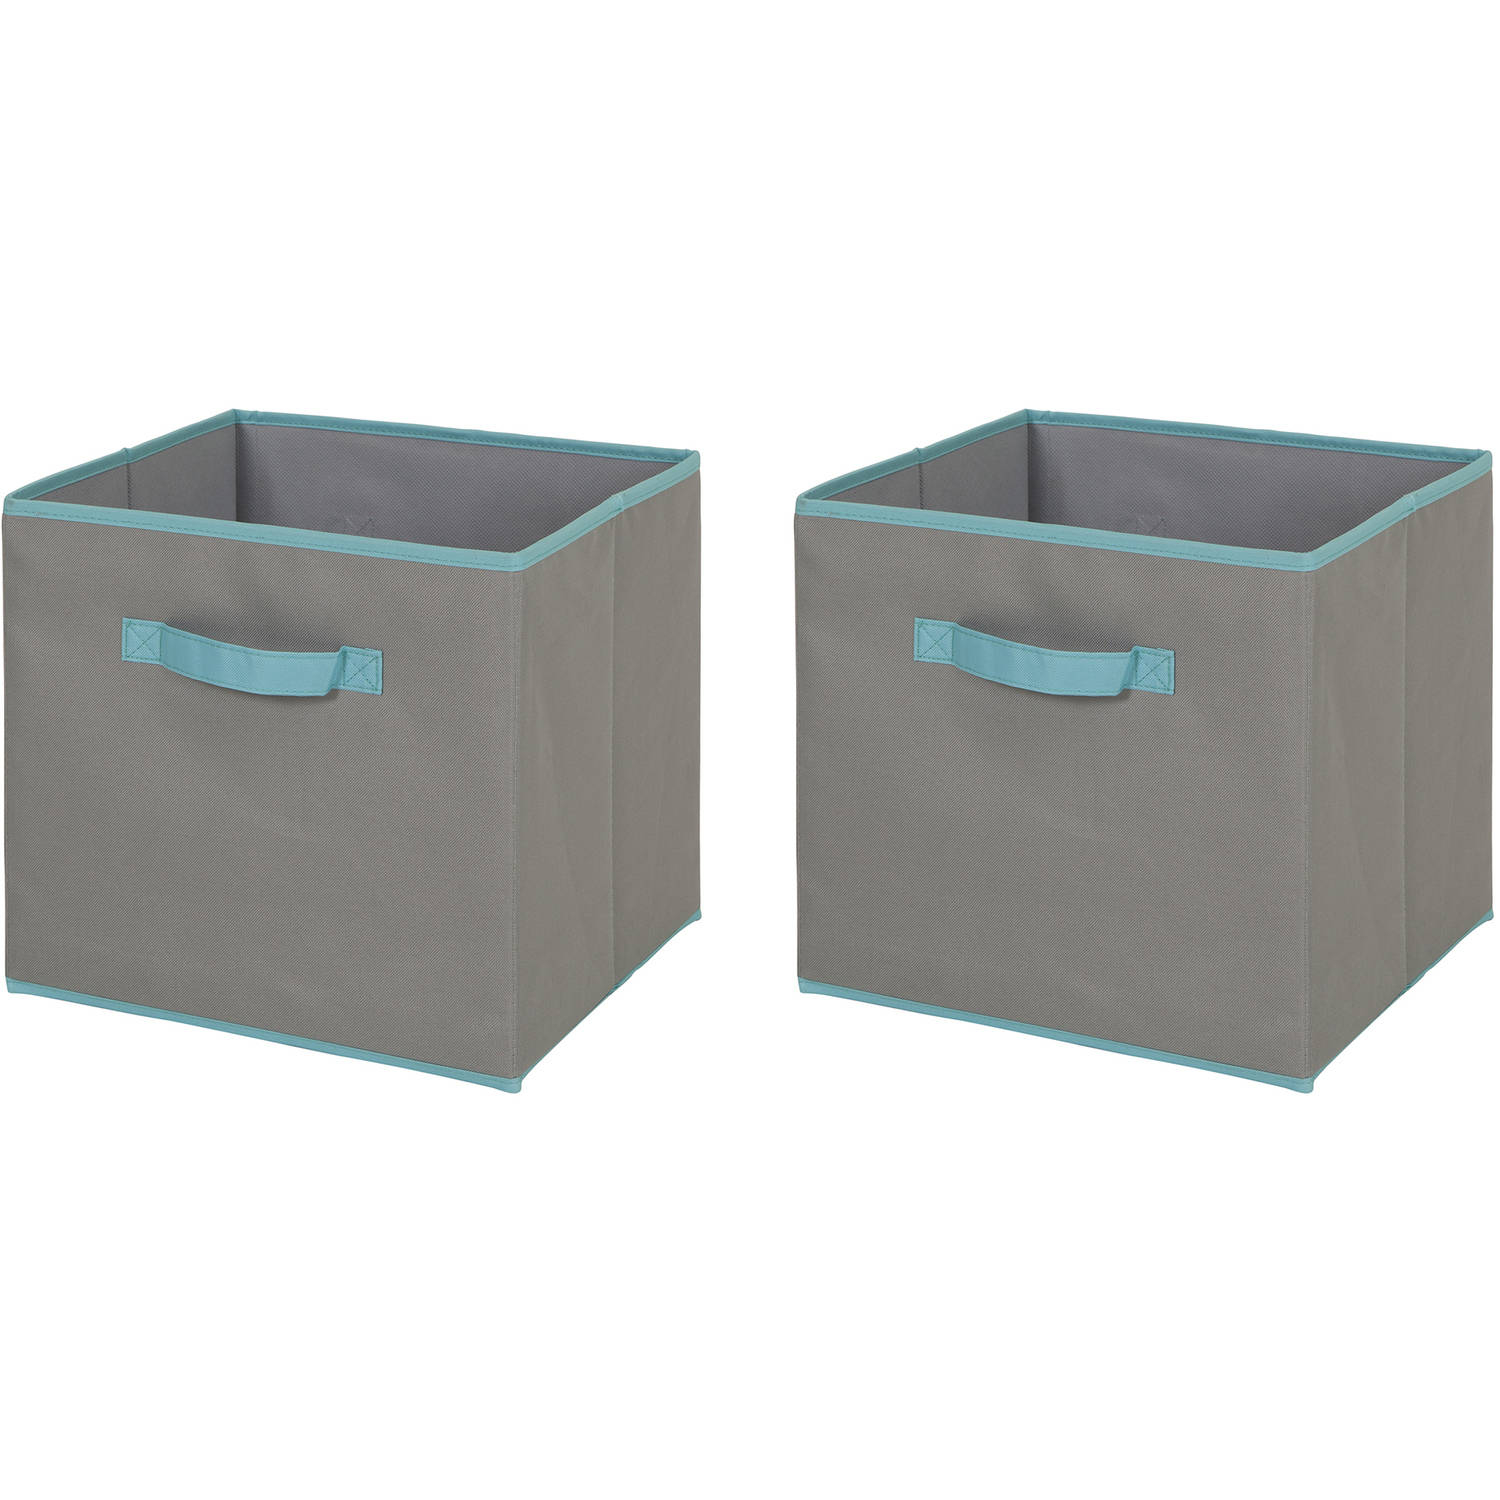 South Shore Fabric Storage Bin 2 Pack Large Size Gray And Turquoise throughout sizing 1500 X 1500